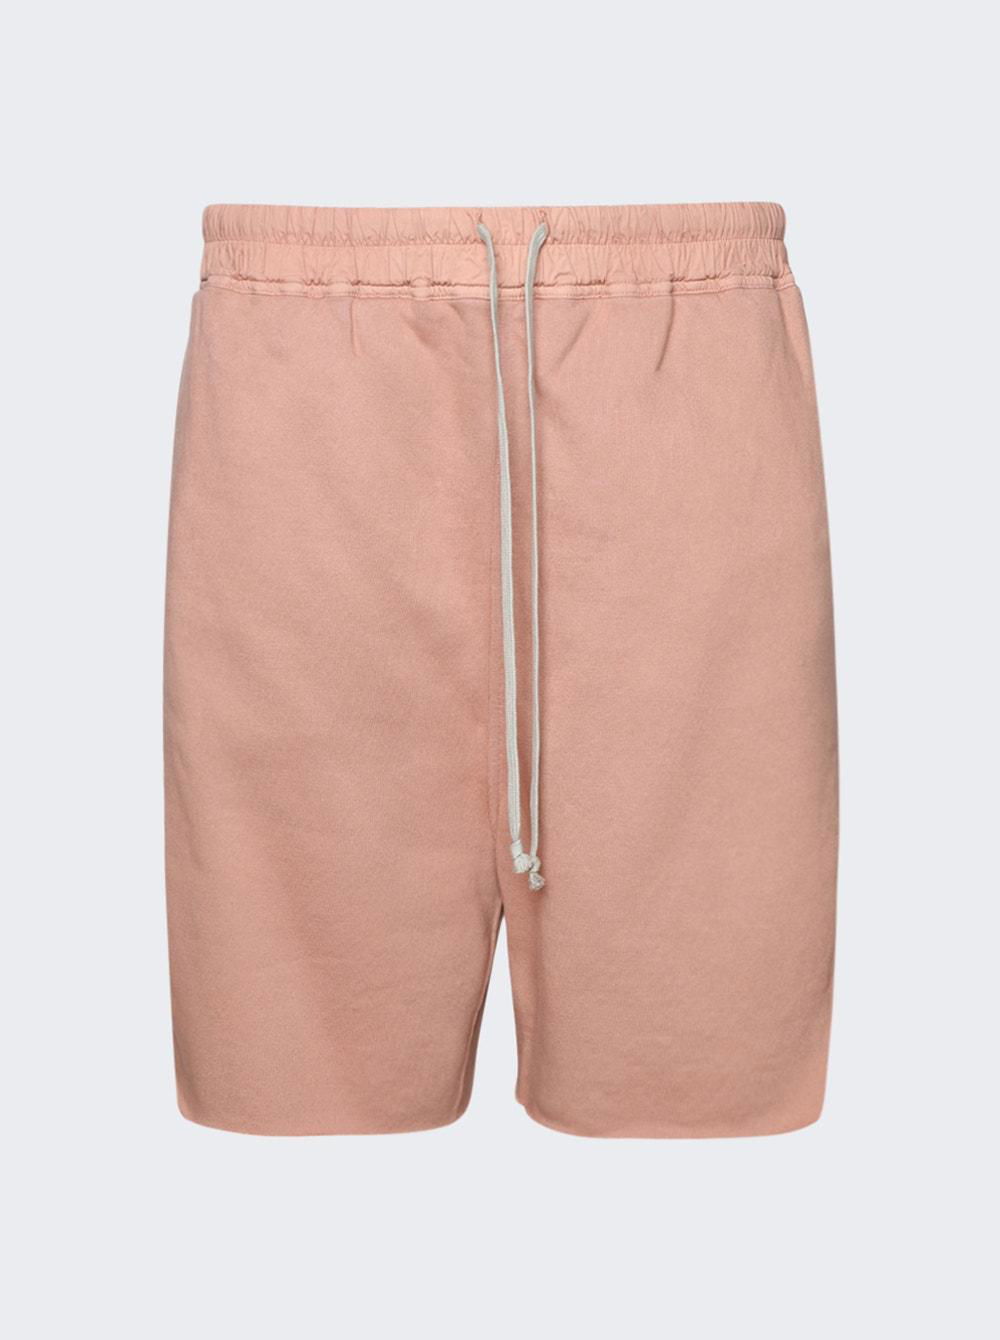 Long Boxer Shorts Dark Pink  | The Webster by RICK OWENS D RK SH DW